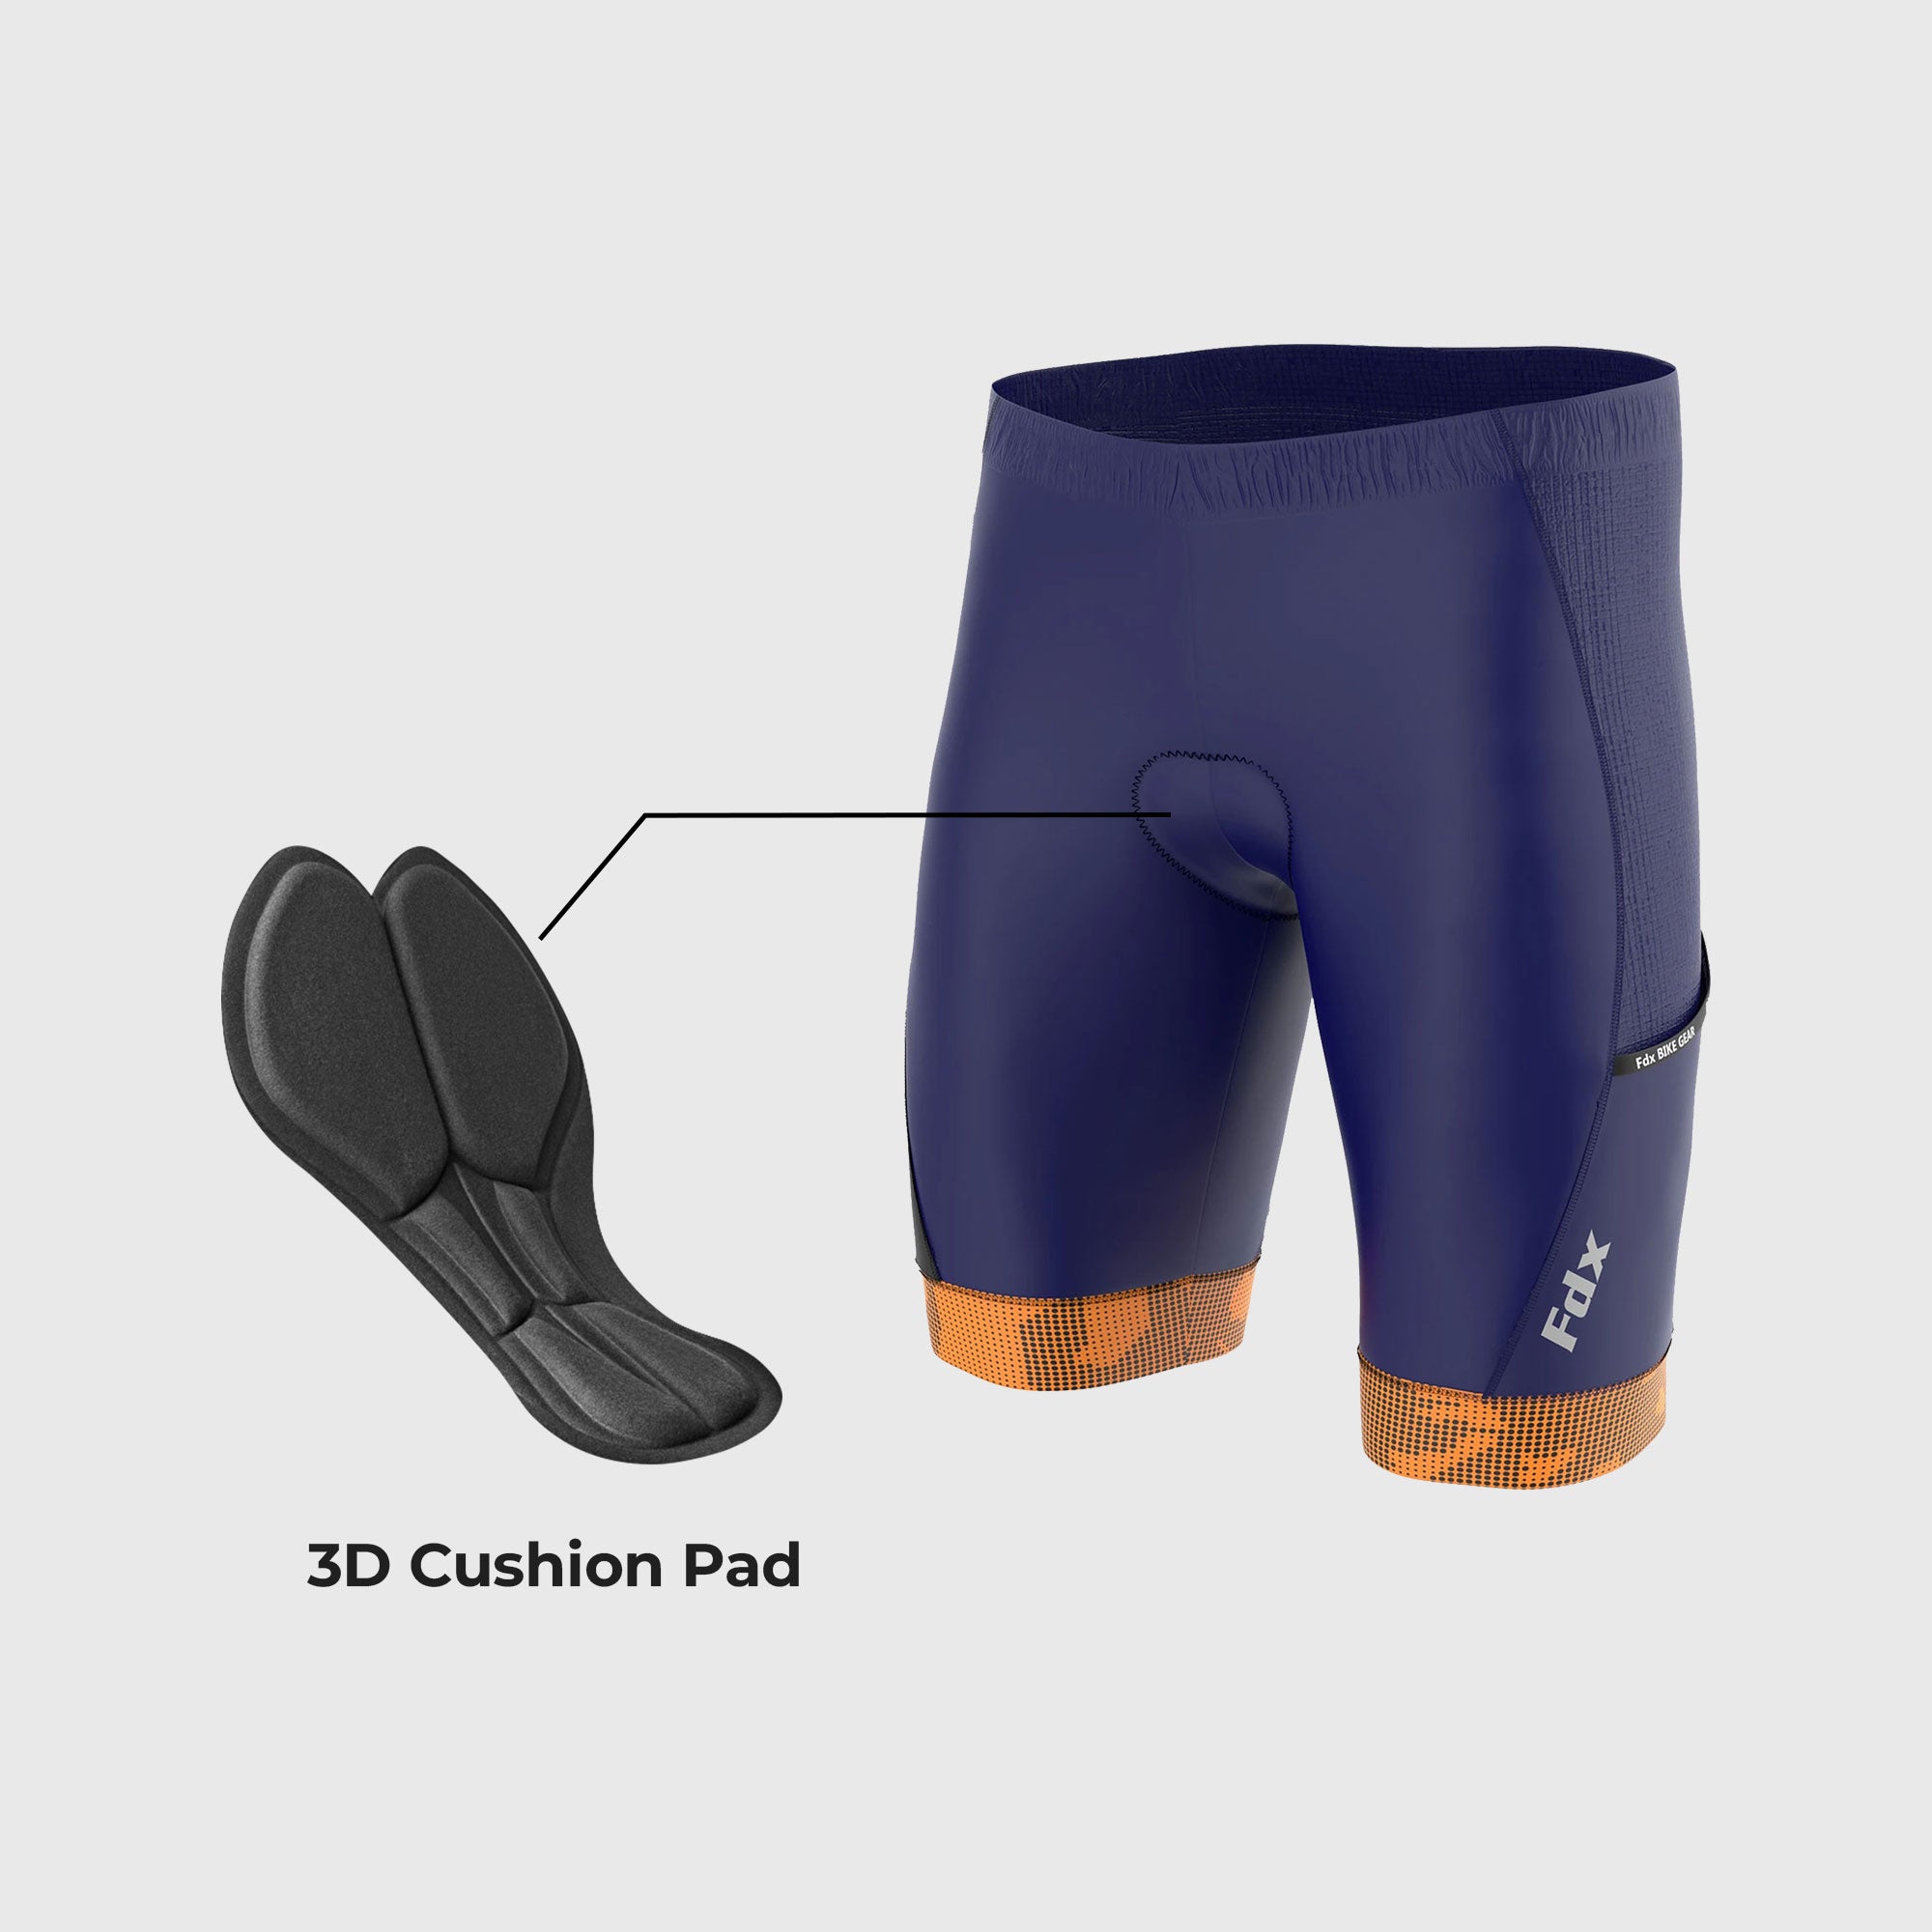 Fdx Mens Navy Blue Gel Padded Cycling Shorts for Summer Best Outdoor Knickers Road Bike Short Length Pants - All Day